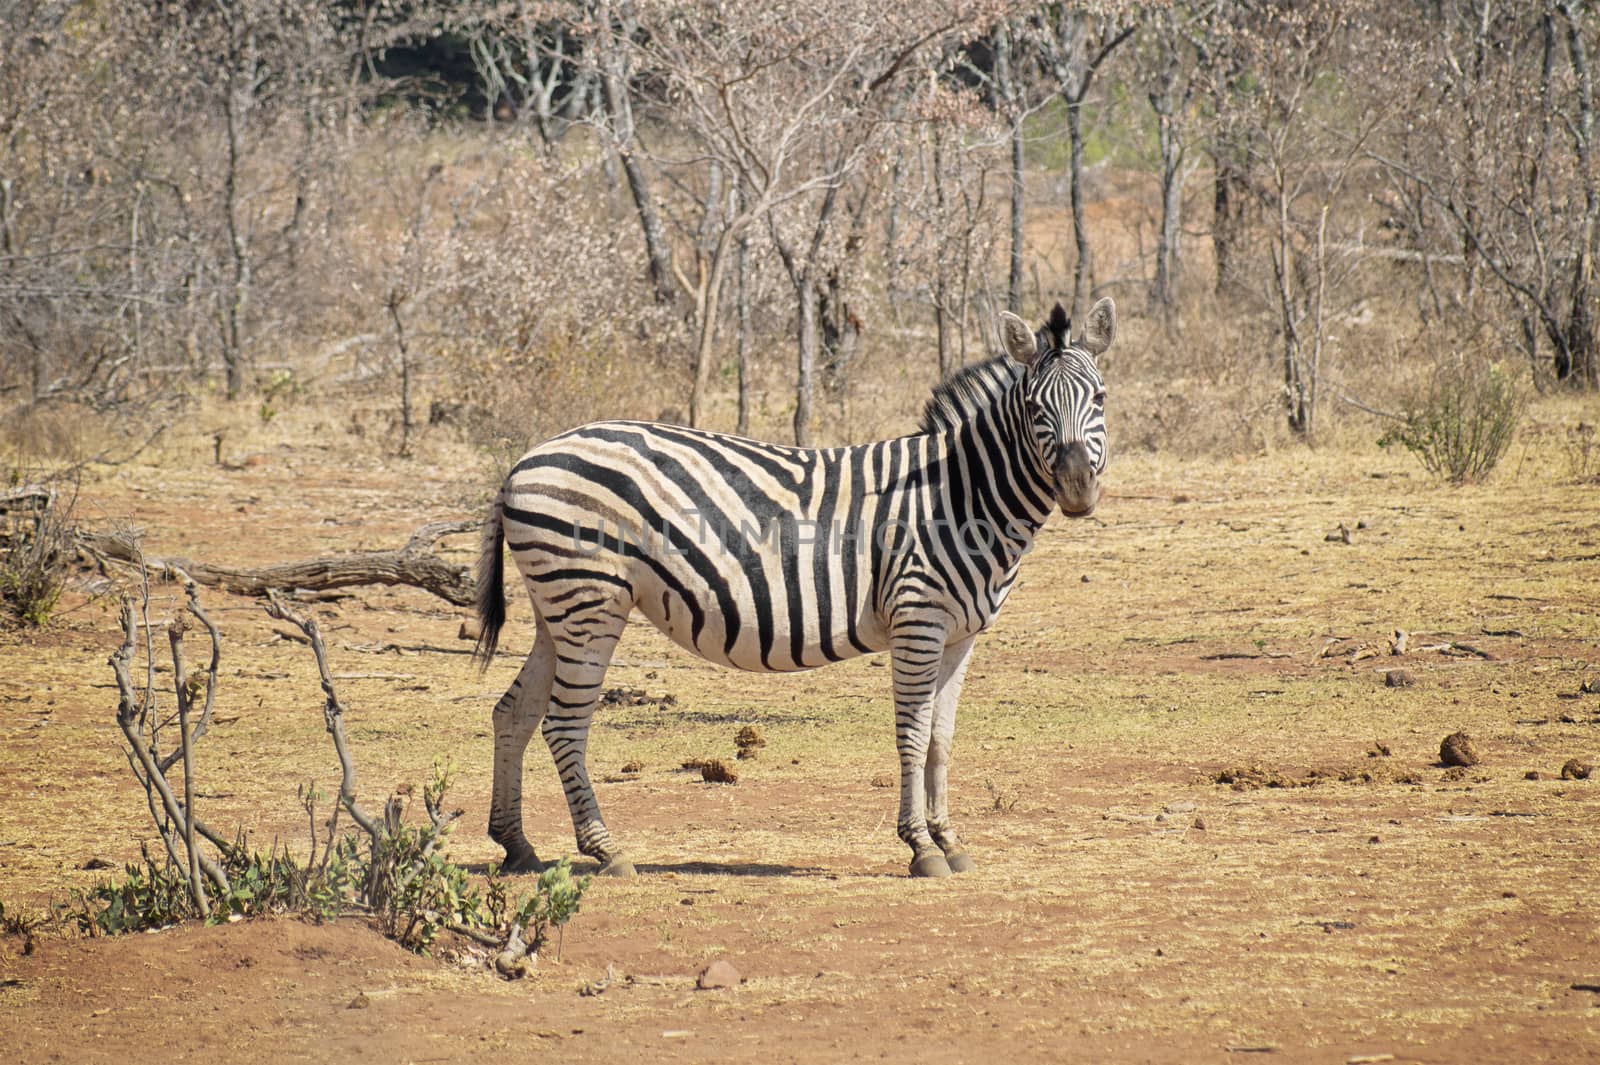 Zebra standing on the savannah looking straight ahead by Sportactive